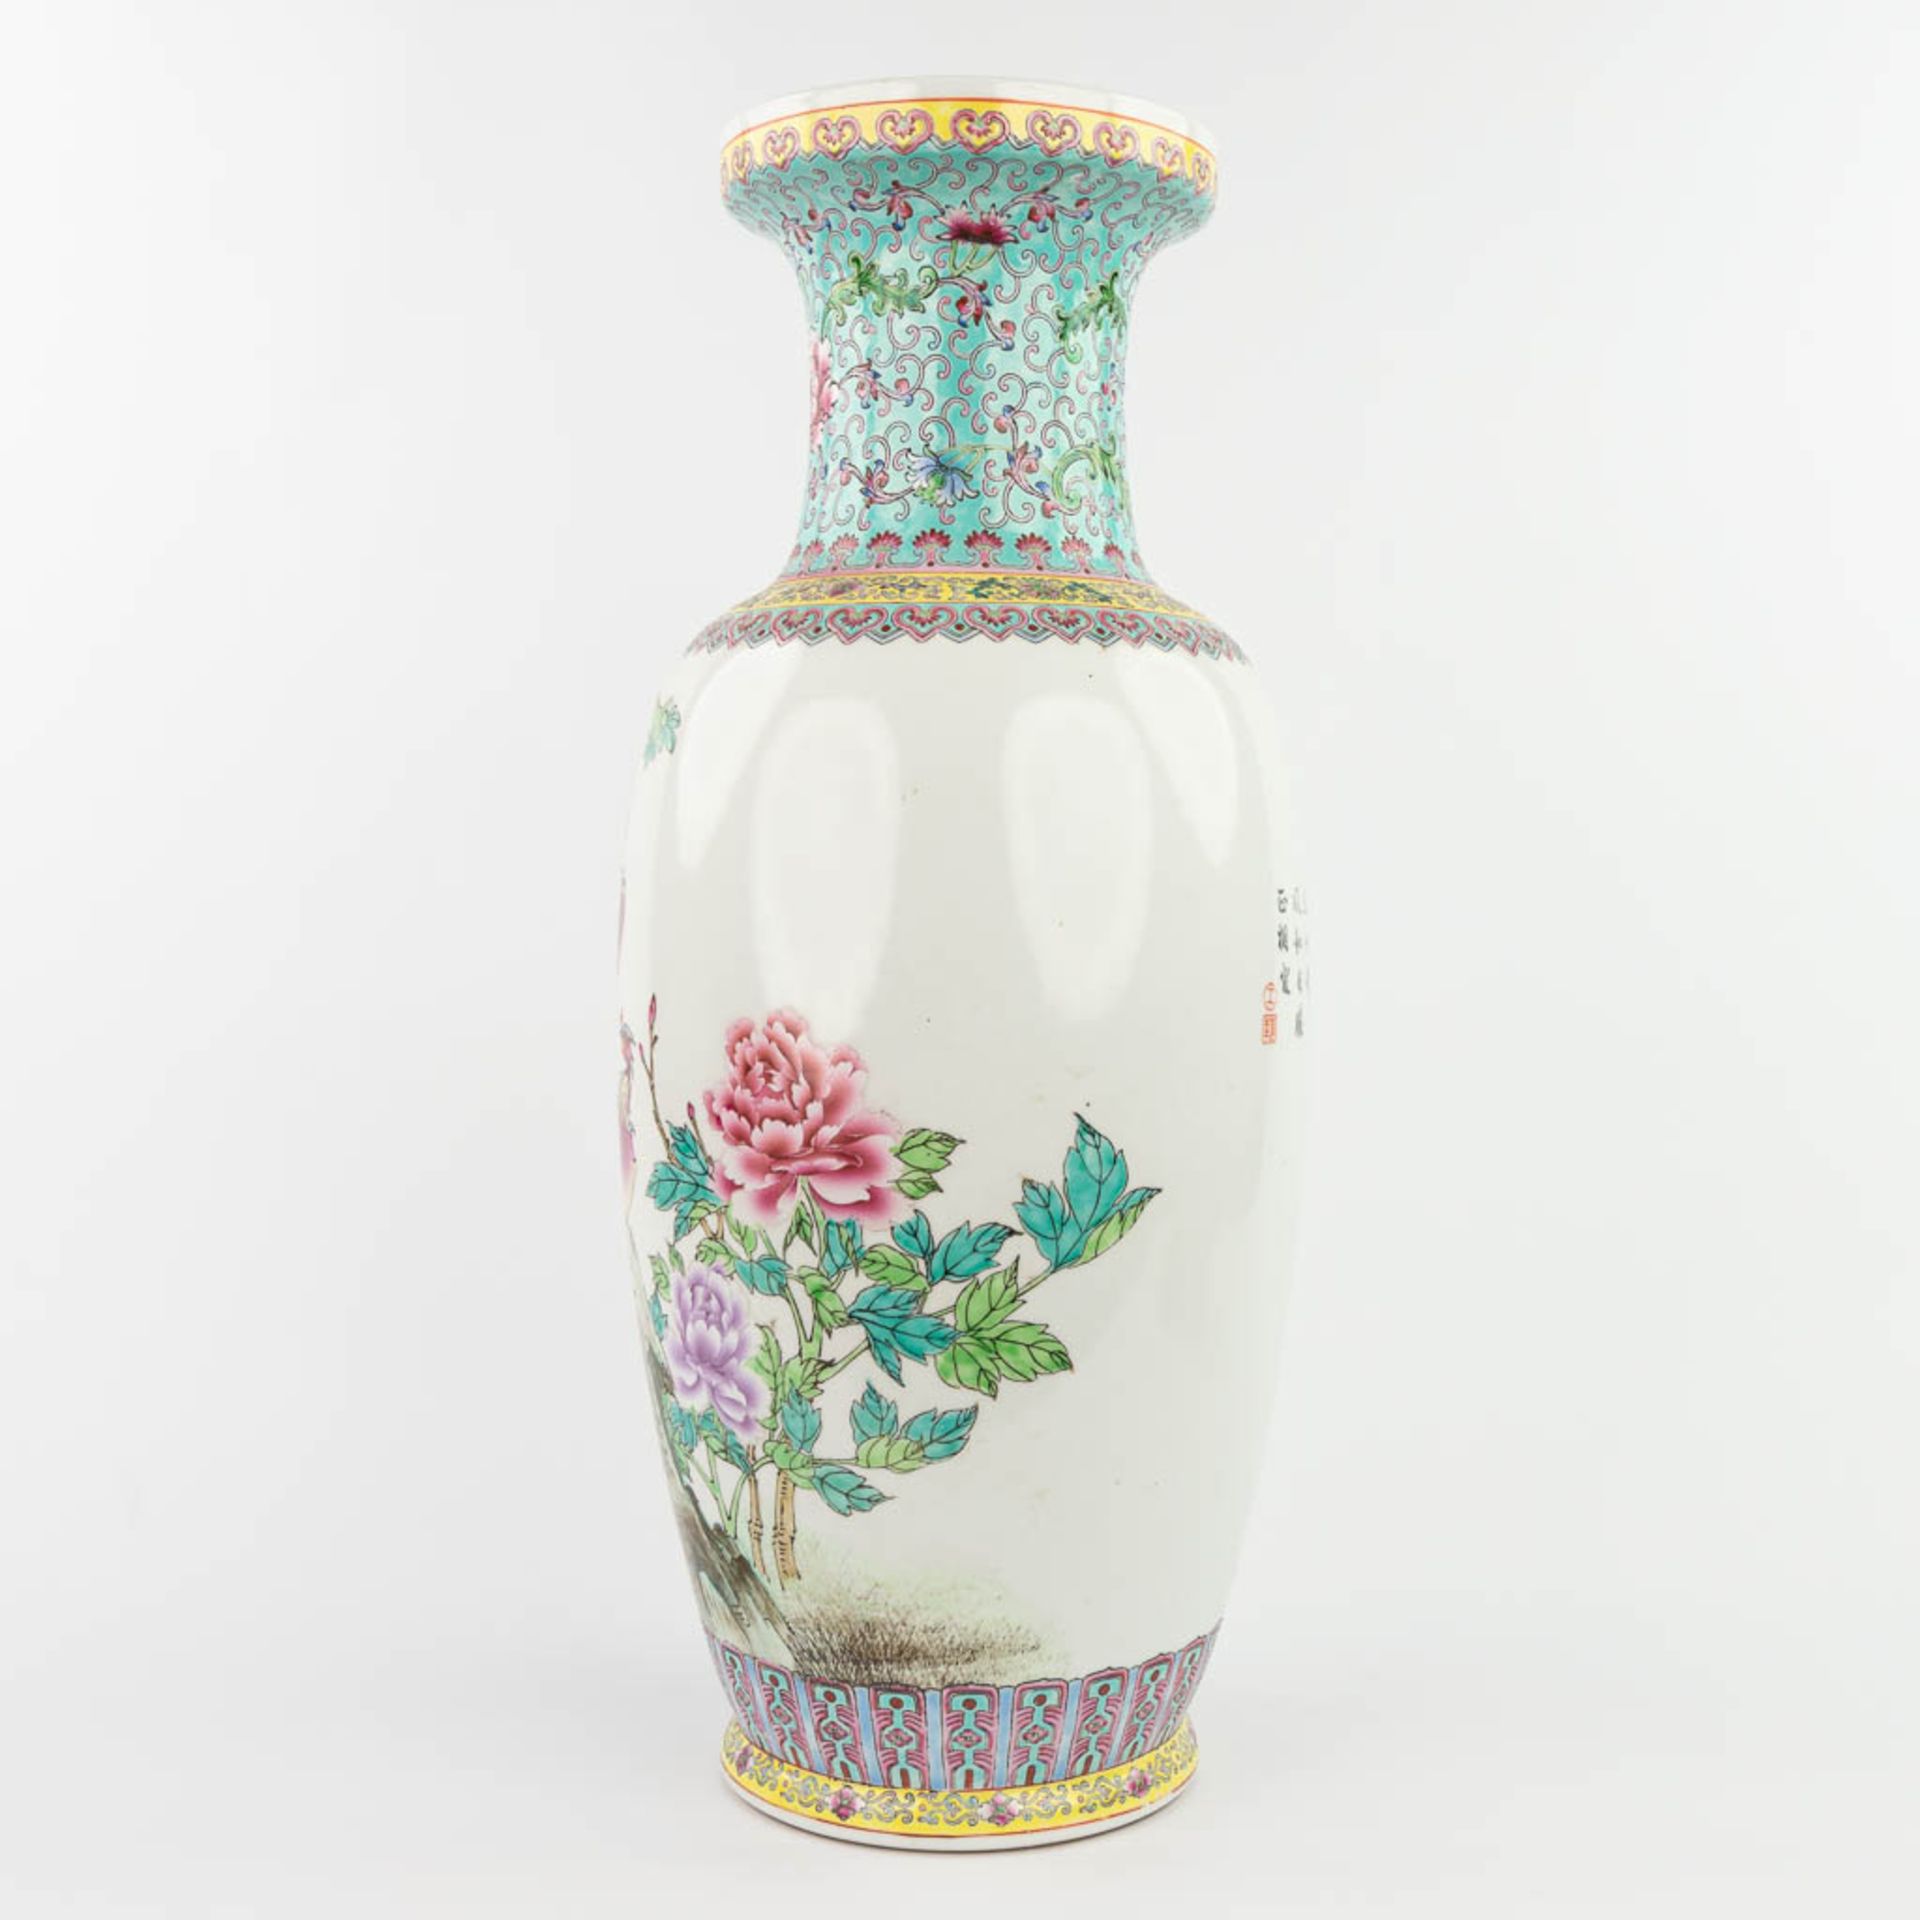 A Chinese vase made of porcelain and decorated with peacocks. 20th C. (60,5 x 23,5 cm) - Image 3 of 12